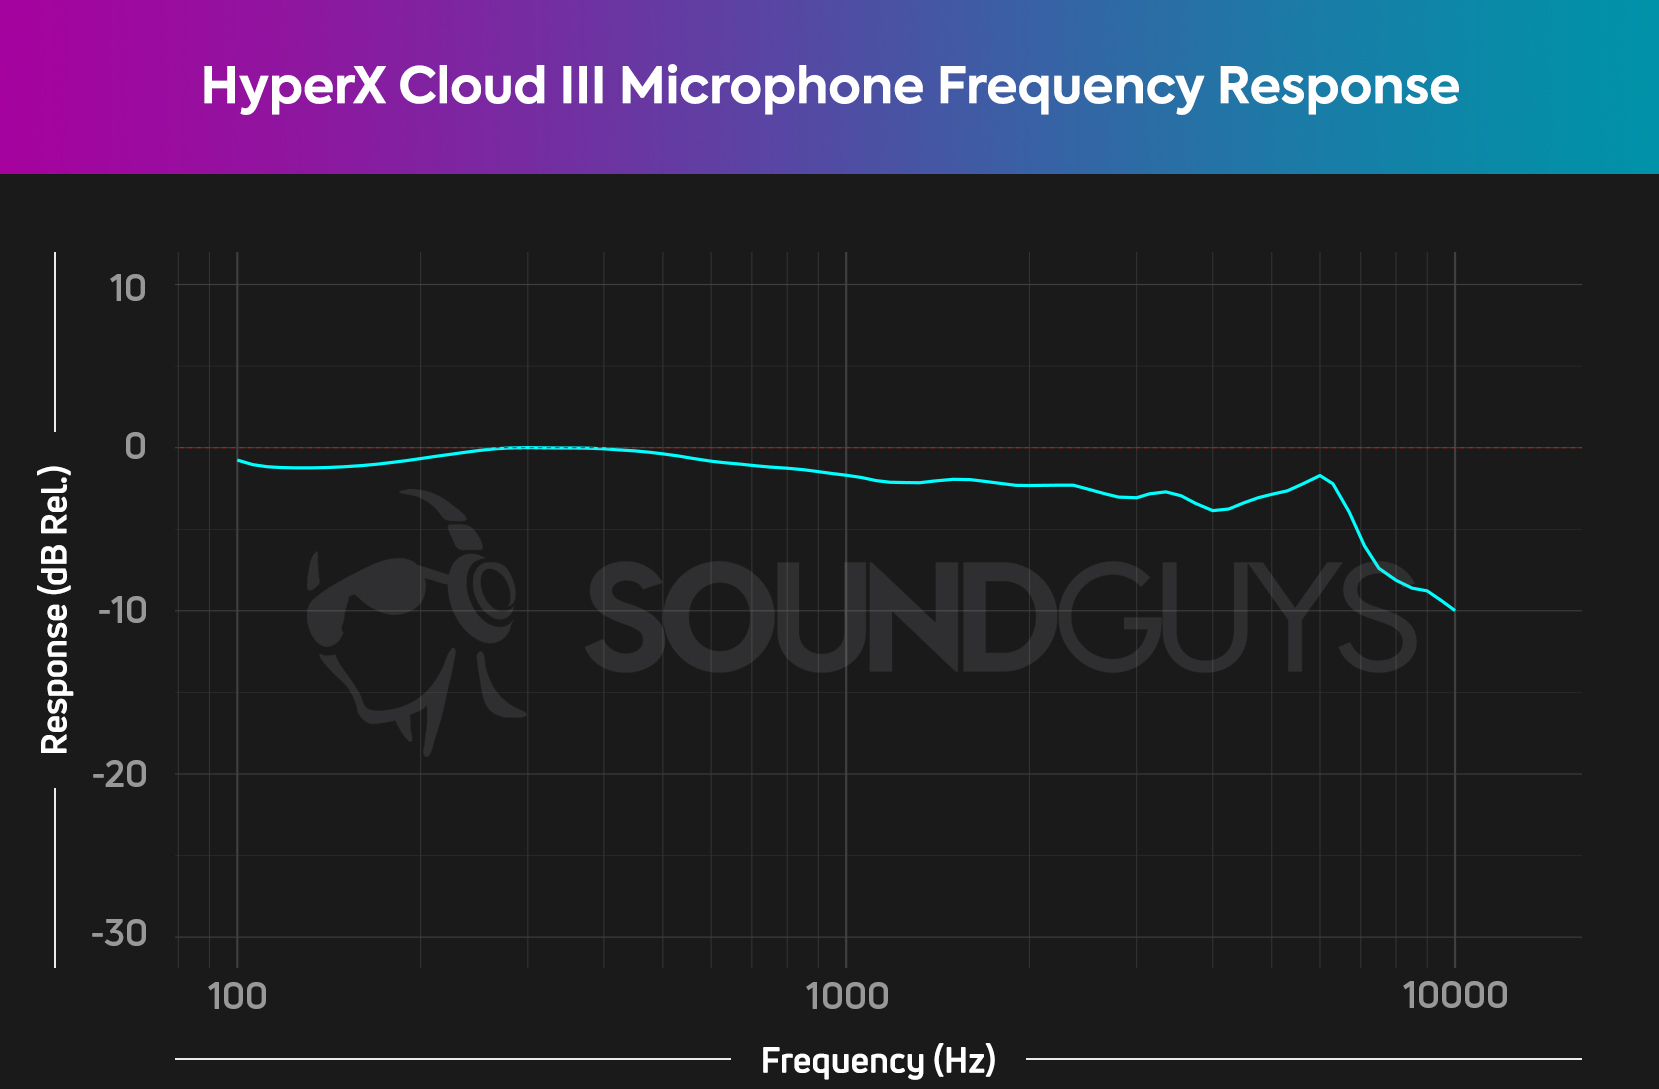 The HyperX Cloud III microphone frequency response chart, showing a very flat frequency response all the way across the spectrum, with a slight dip in the high end.